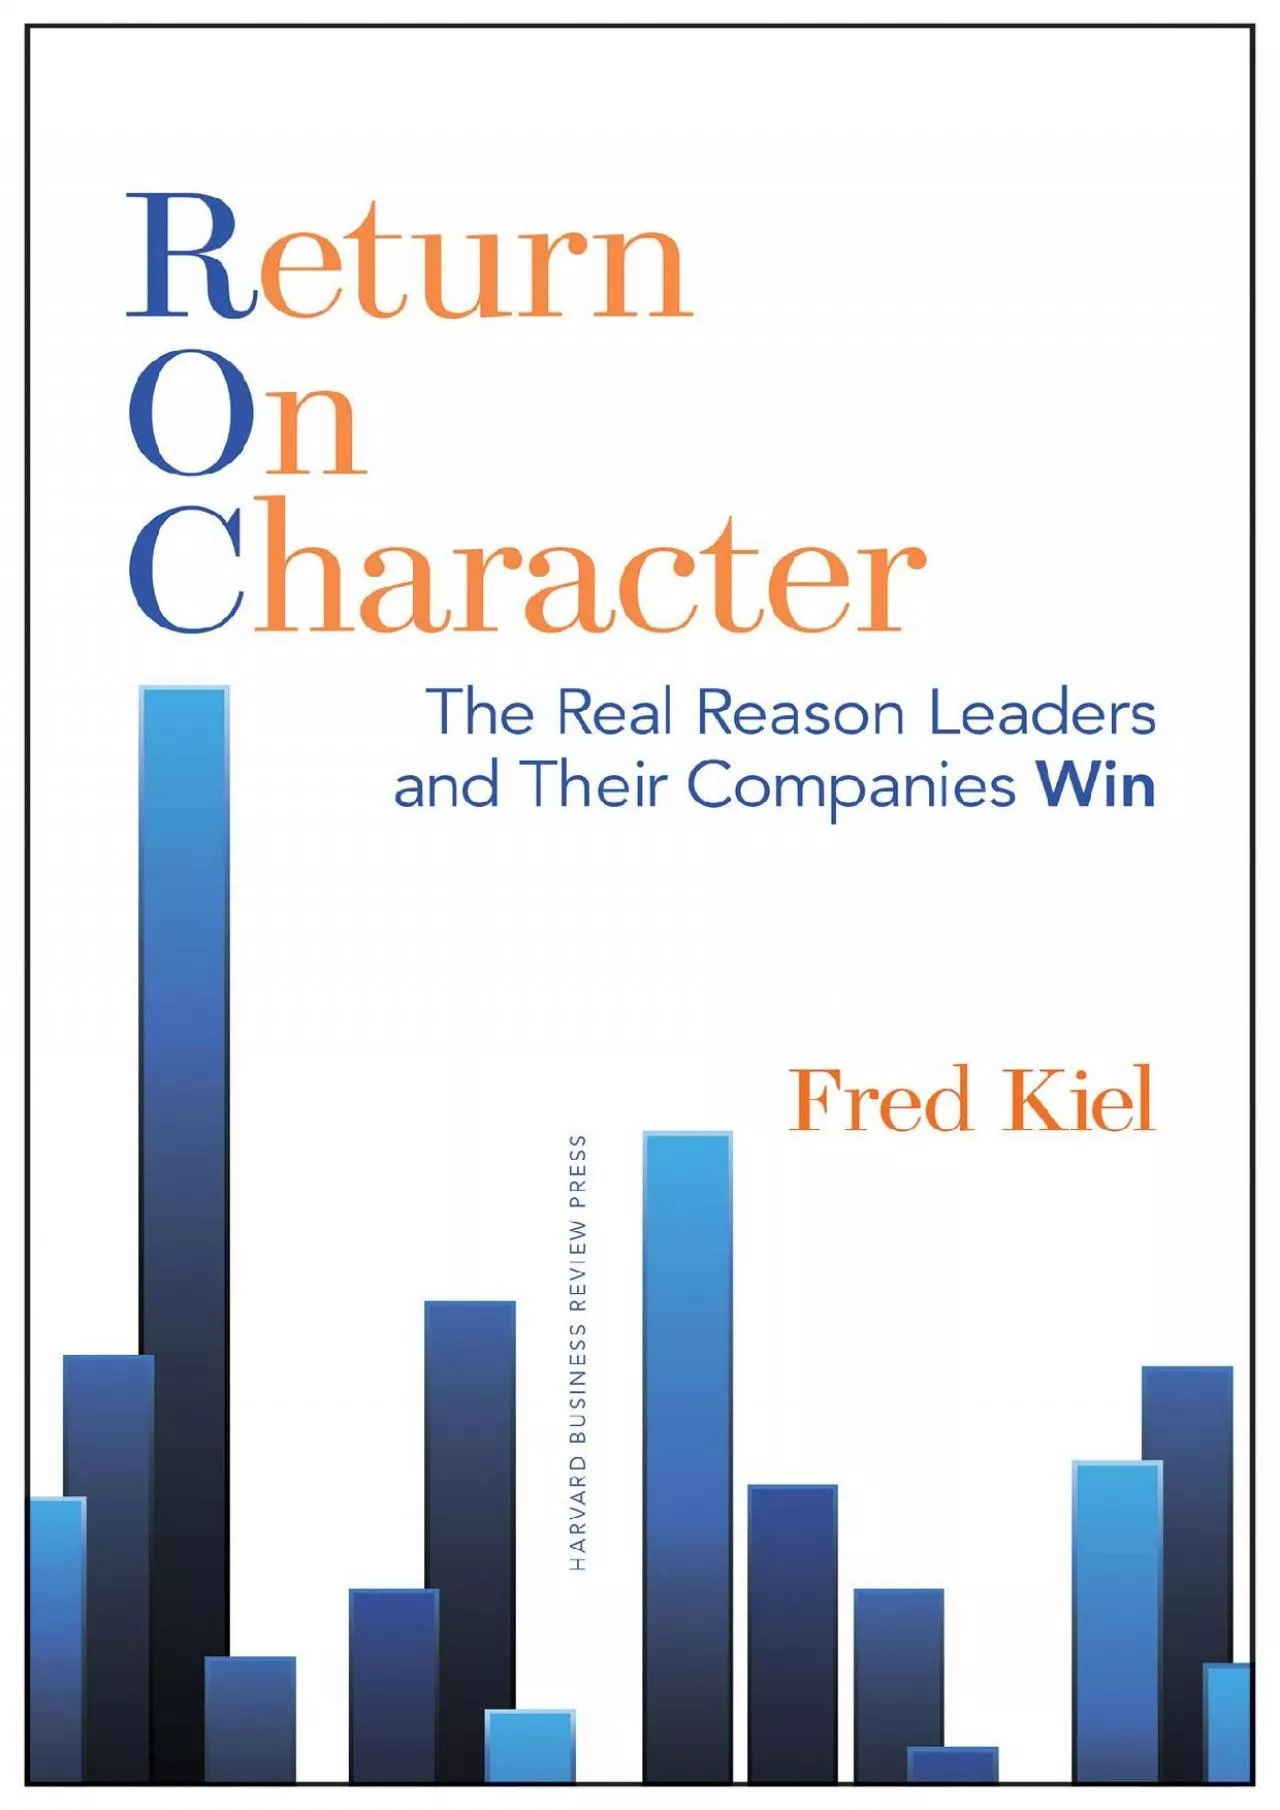 (BOOS)-Return on Character: The Real Reason Leaders and Their Companies Win